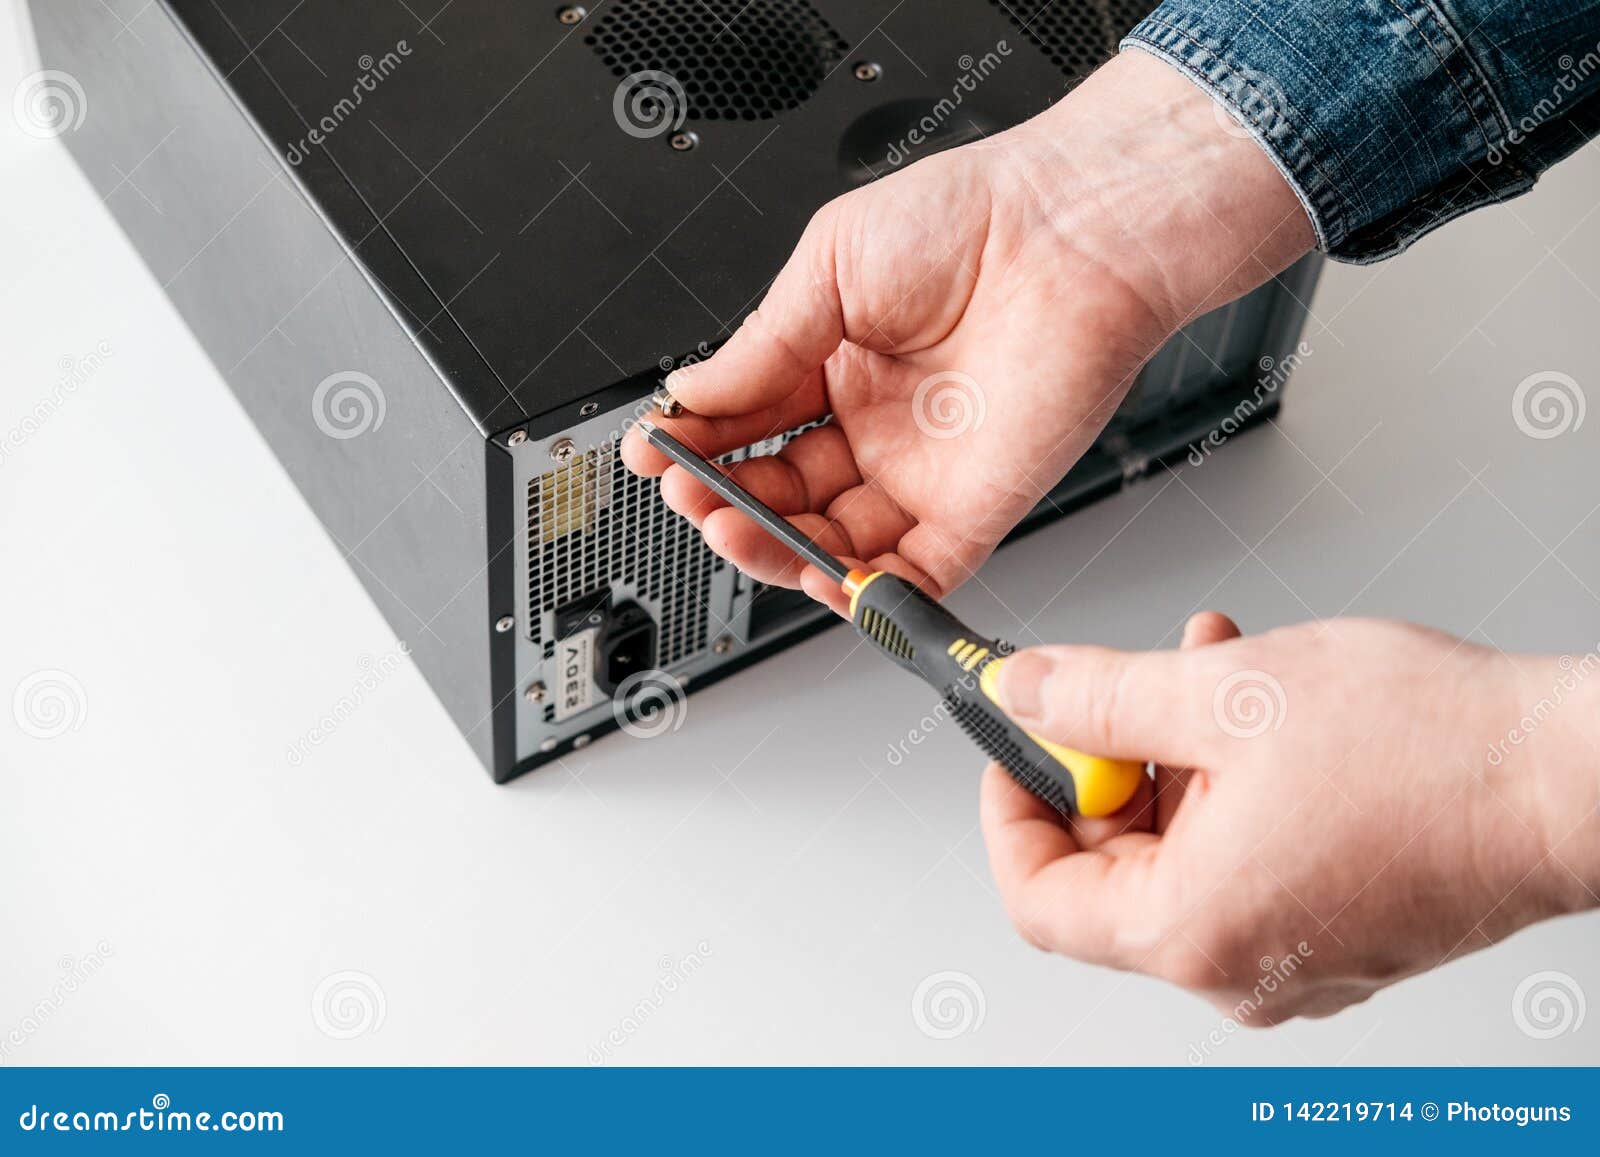 technician disassemble computer with a screwdriver for problems diagnostic